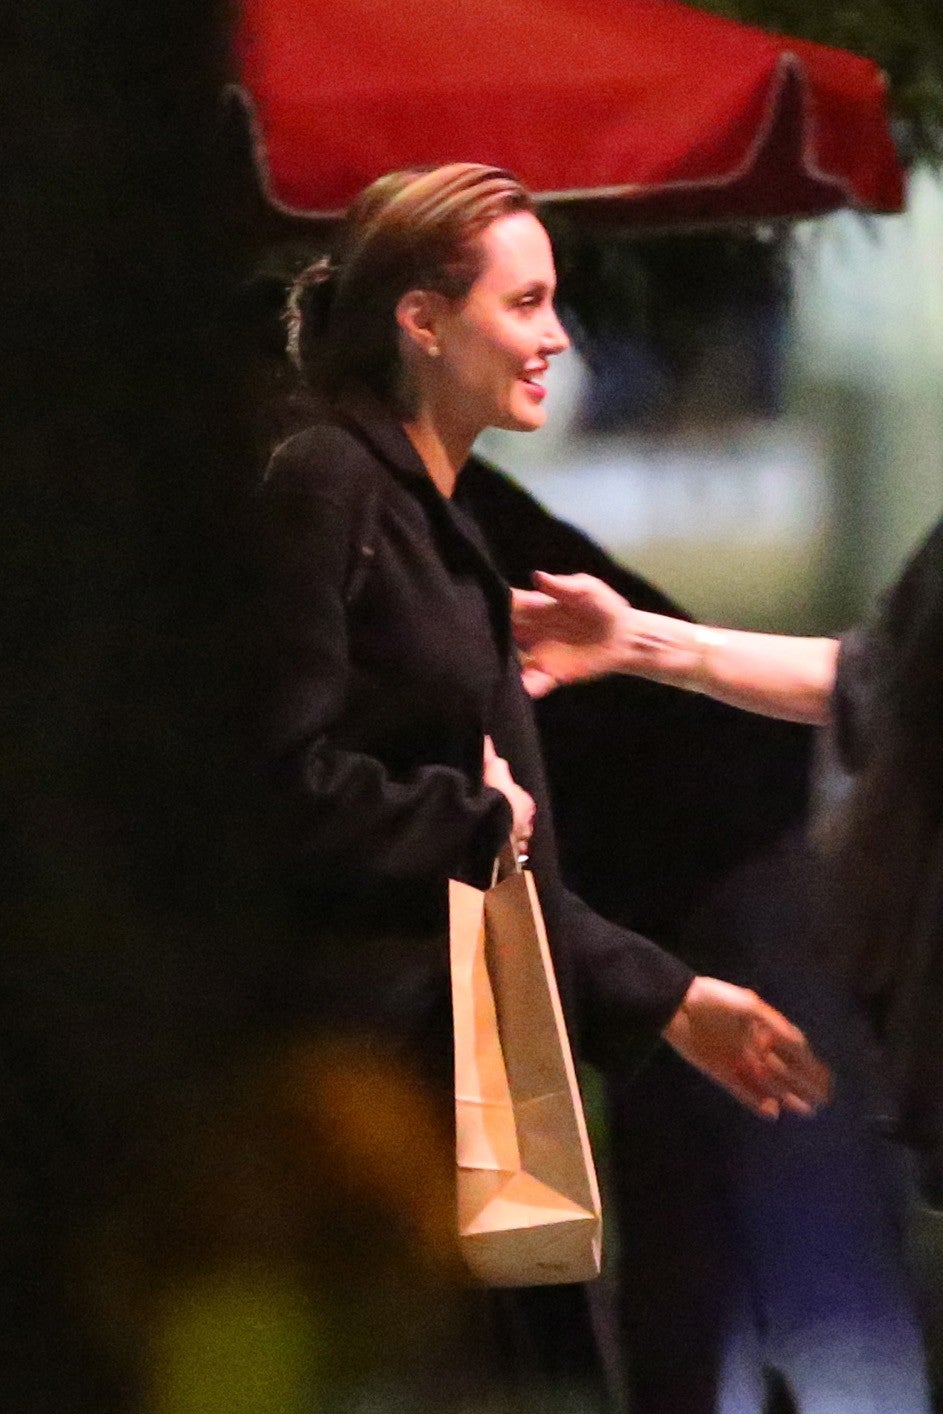 Angelina Jolie having dinner with friends at Rao's restaurant in L.A.